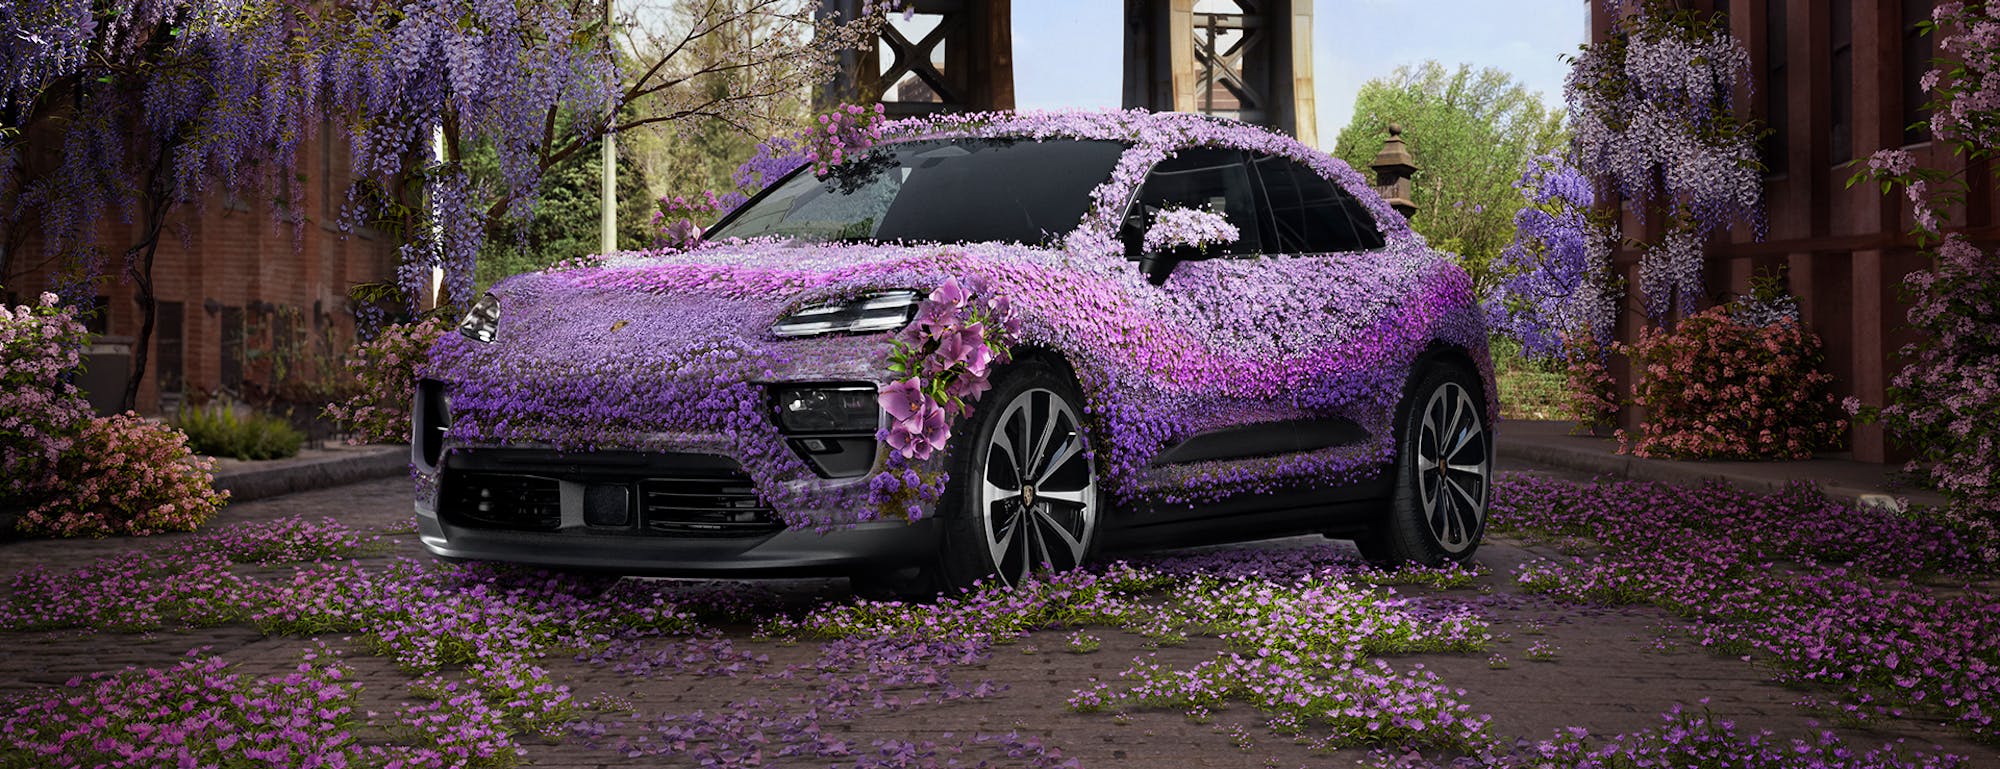 Porsche Macan covered in purple-coloured wisteria flowers